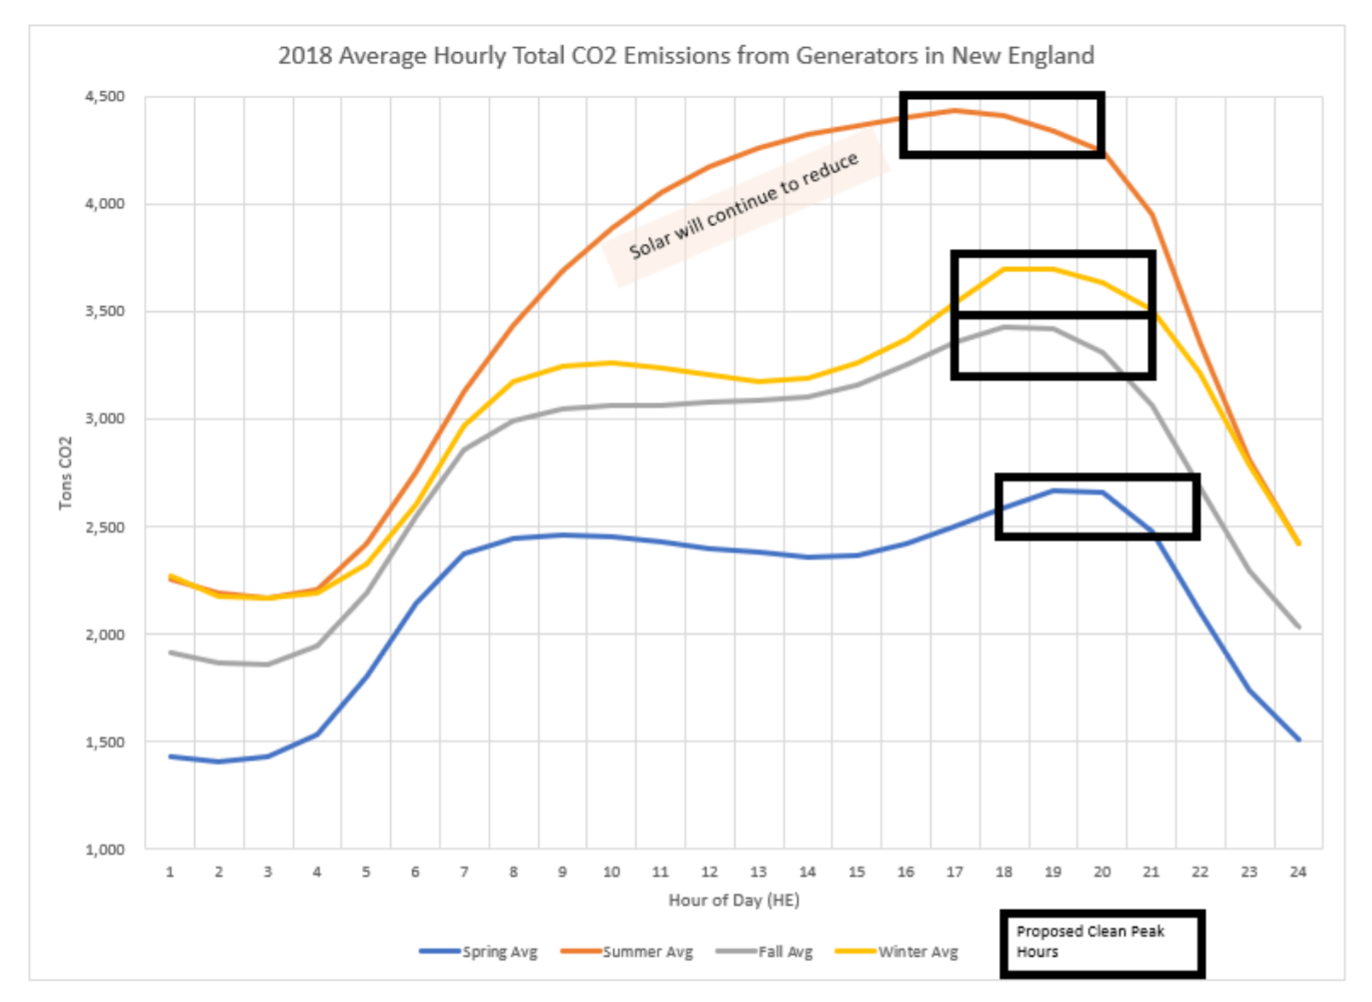 average hourly total CO2 emissions from generators in New England